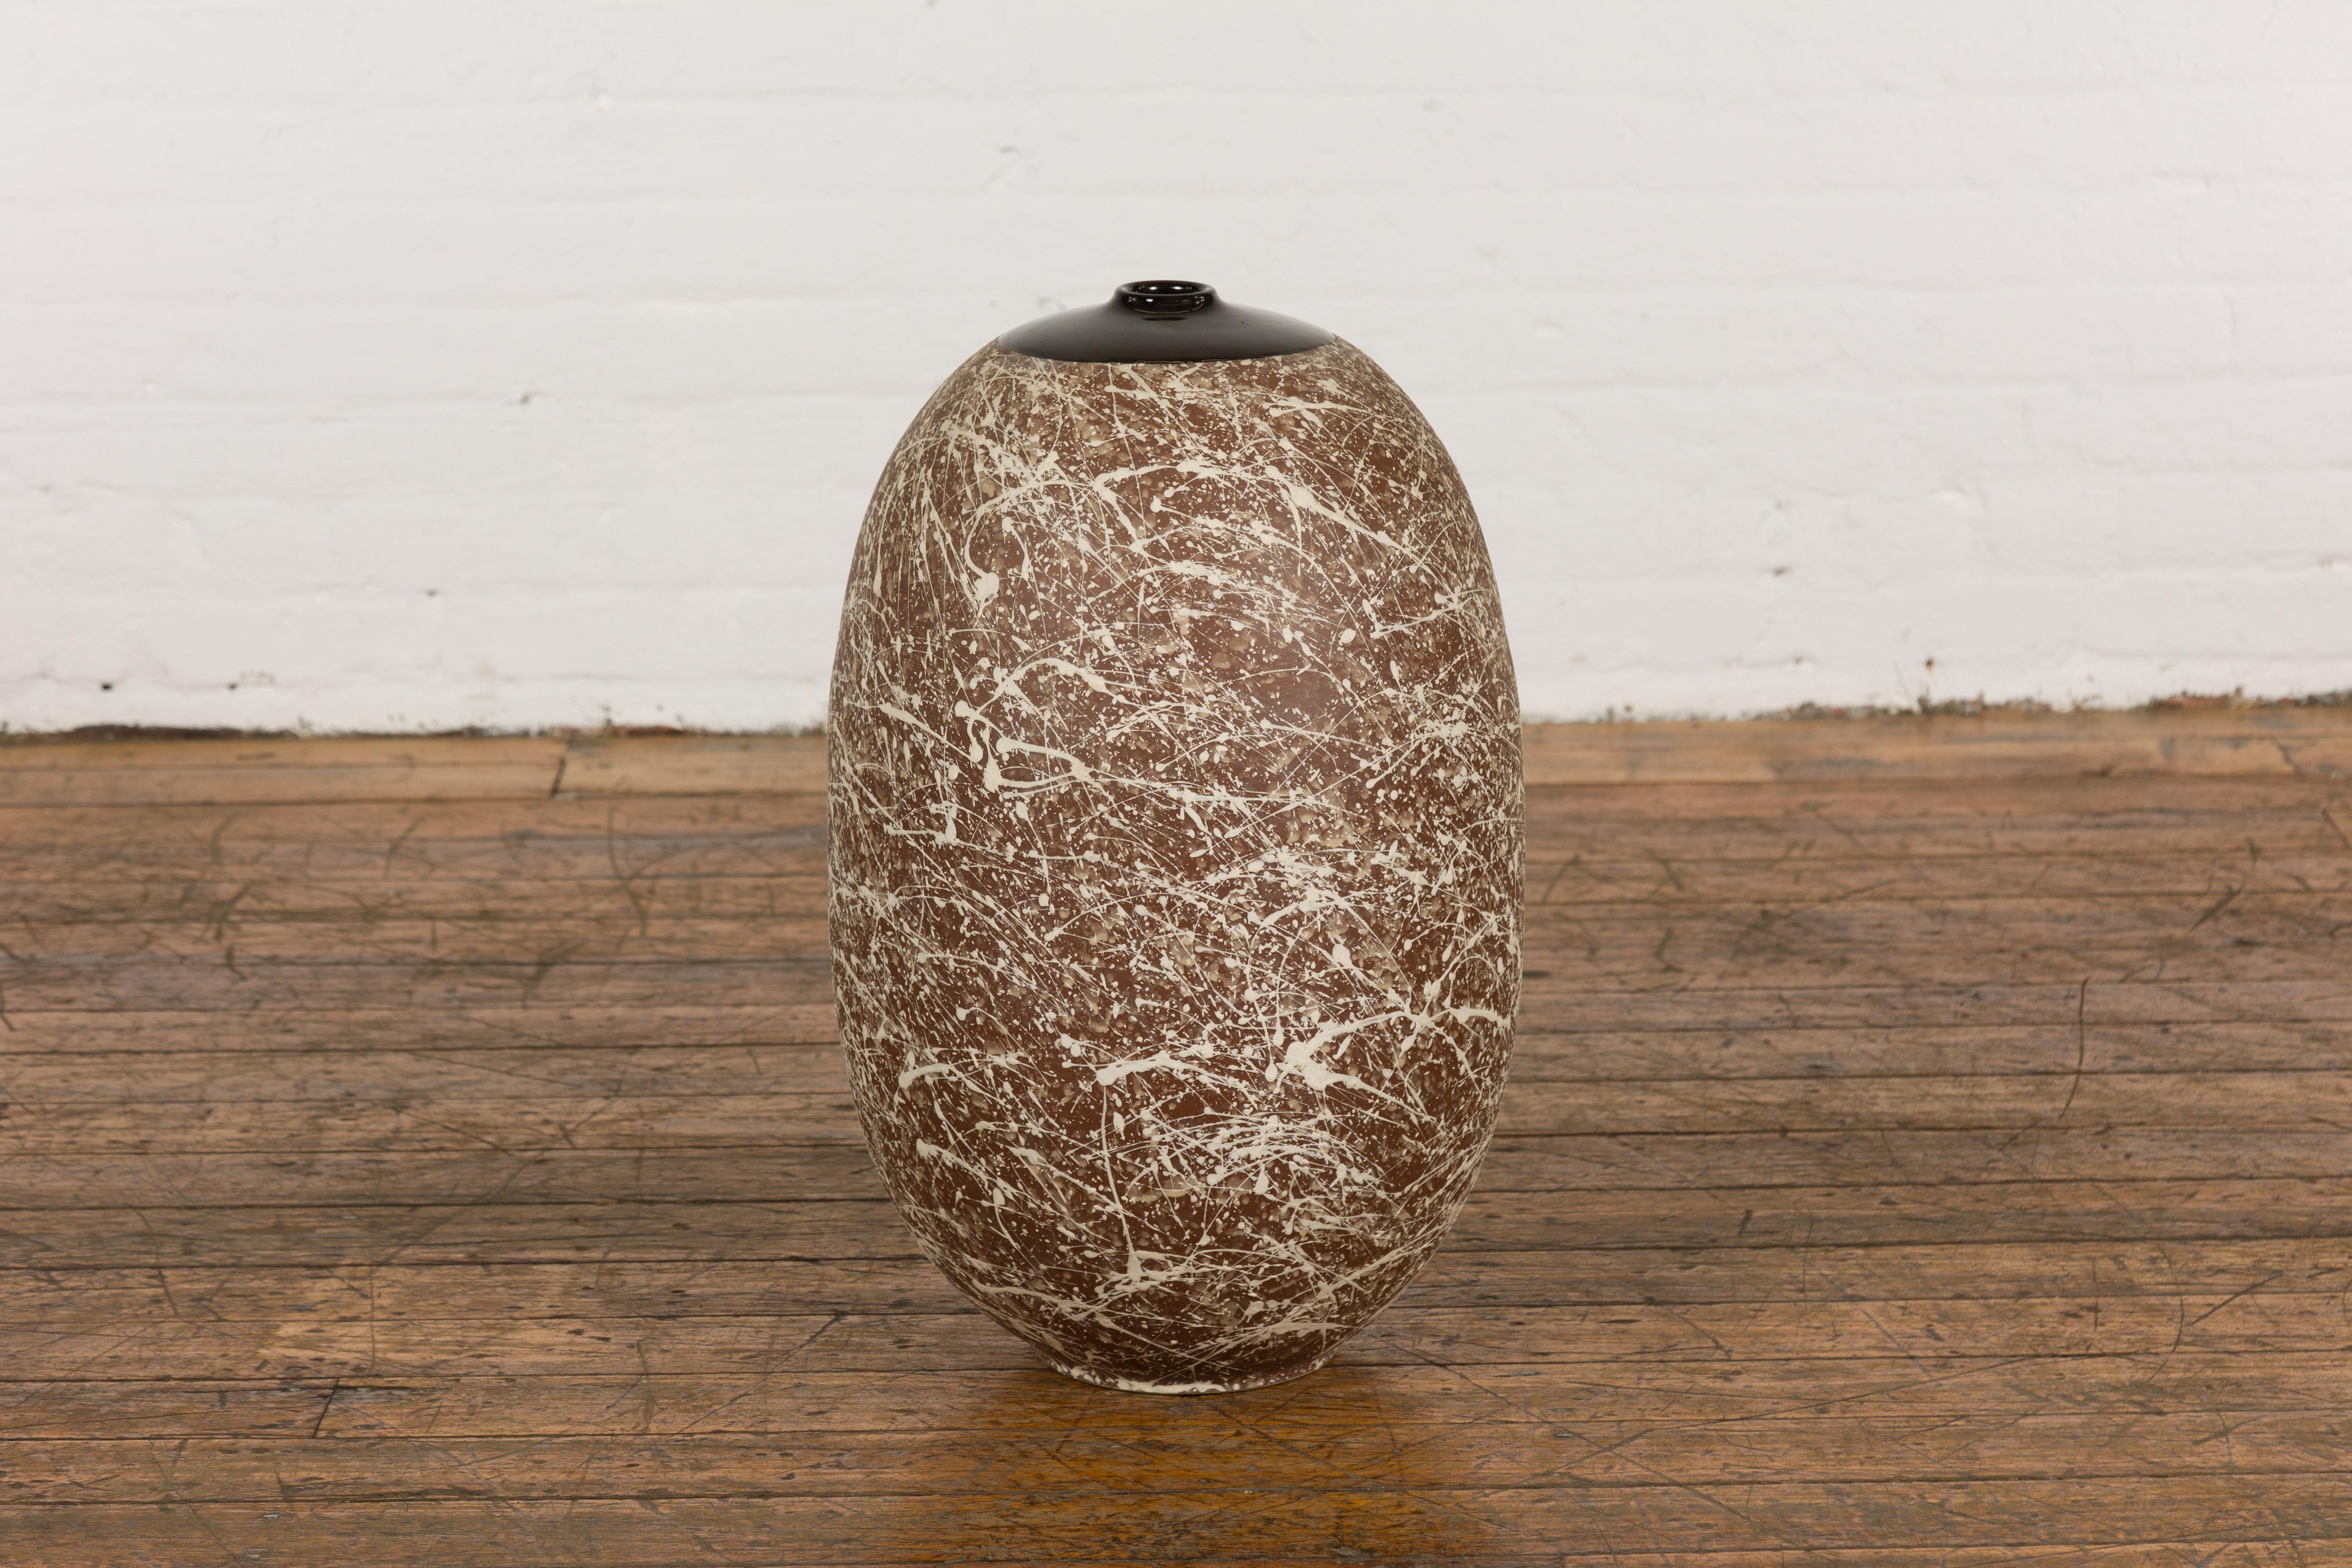 A large contemporary Prem Collection artisan hand crafted ceramic vase or object with narrow mouth, brown ground, energetic hand-painted beige dripping décor, black glazed top and rounded tapering lines. Emanating an engaging blend of modern